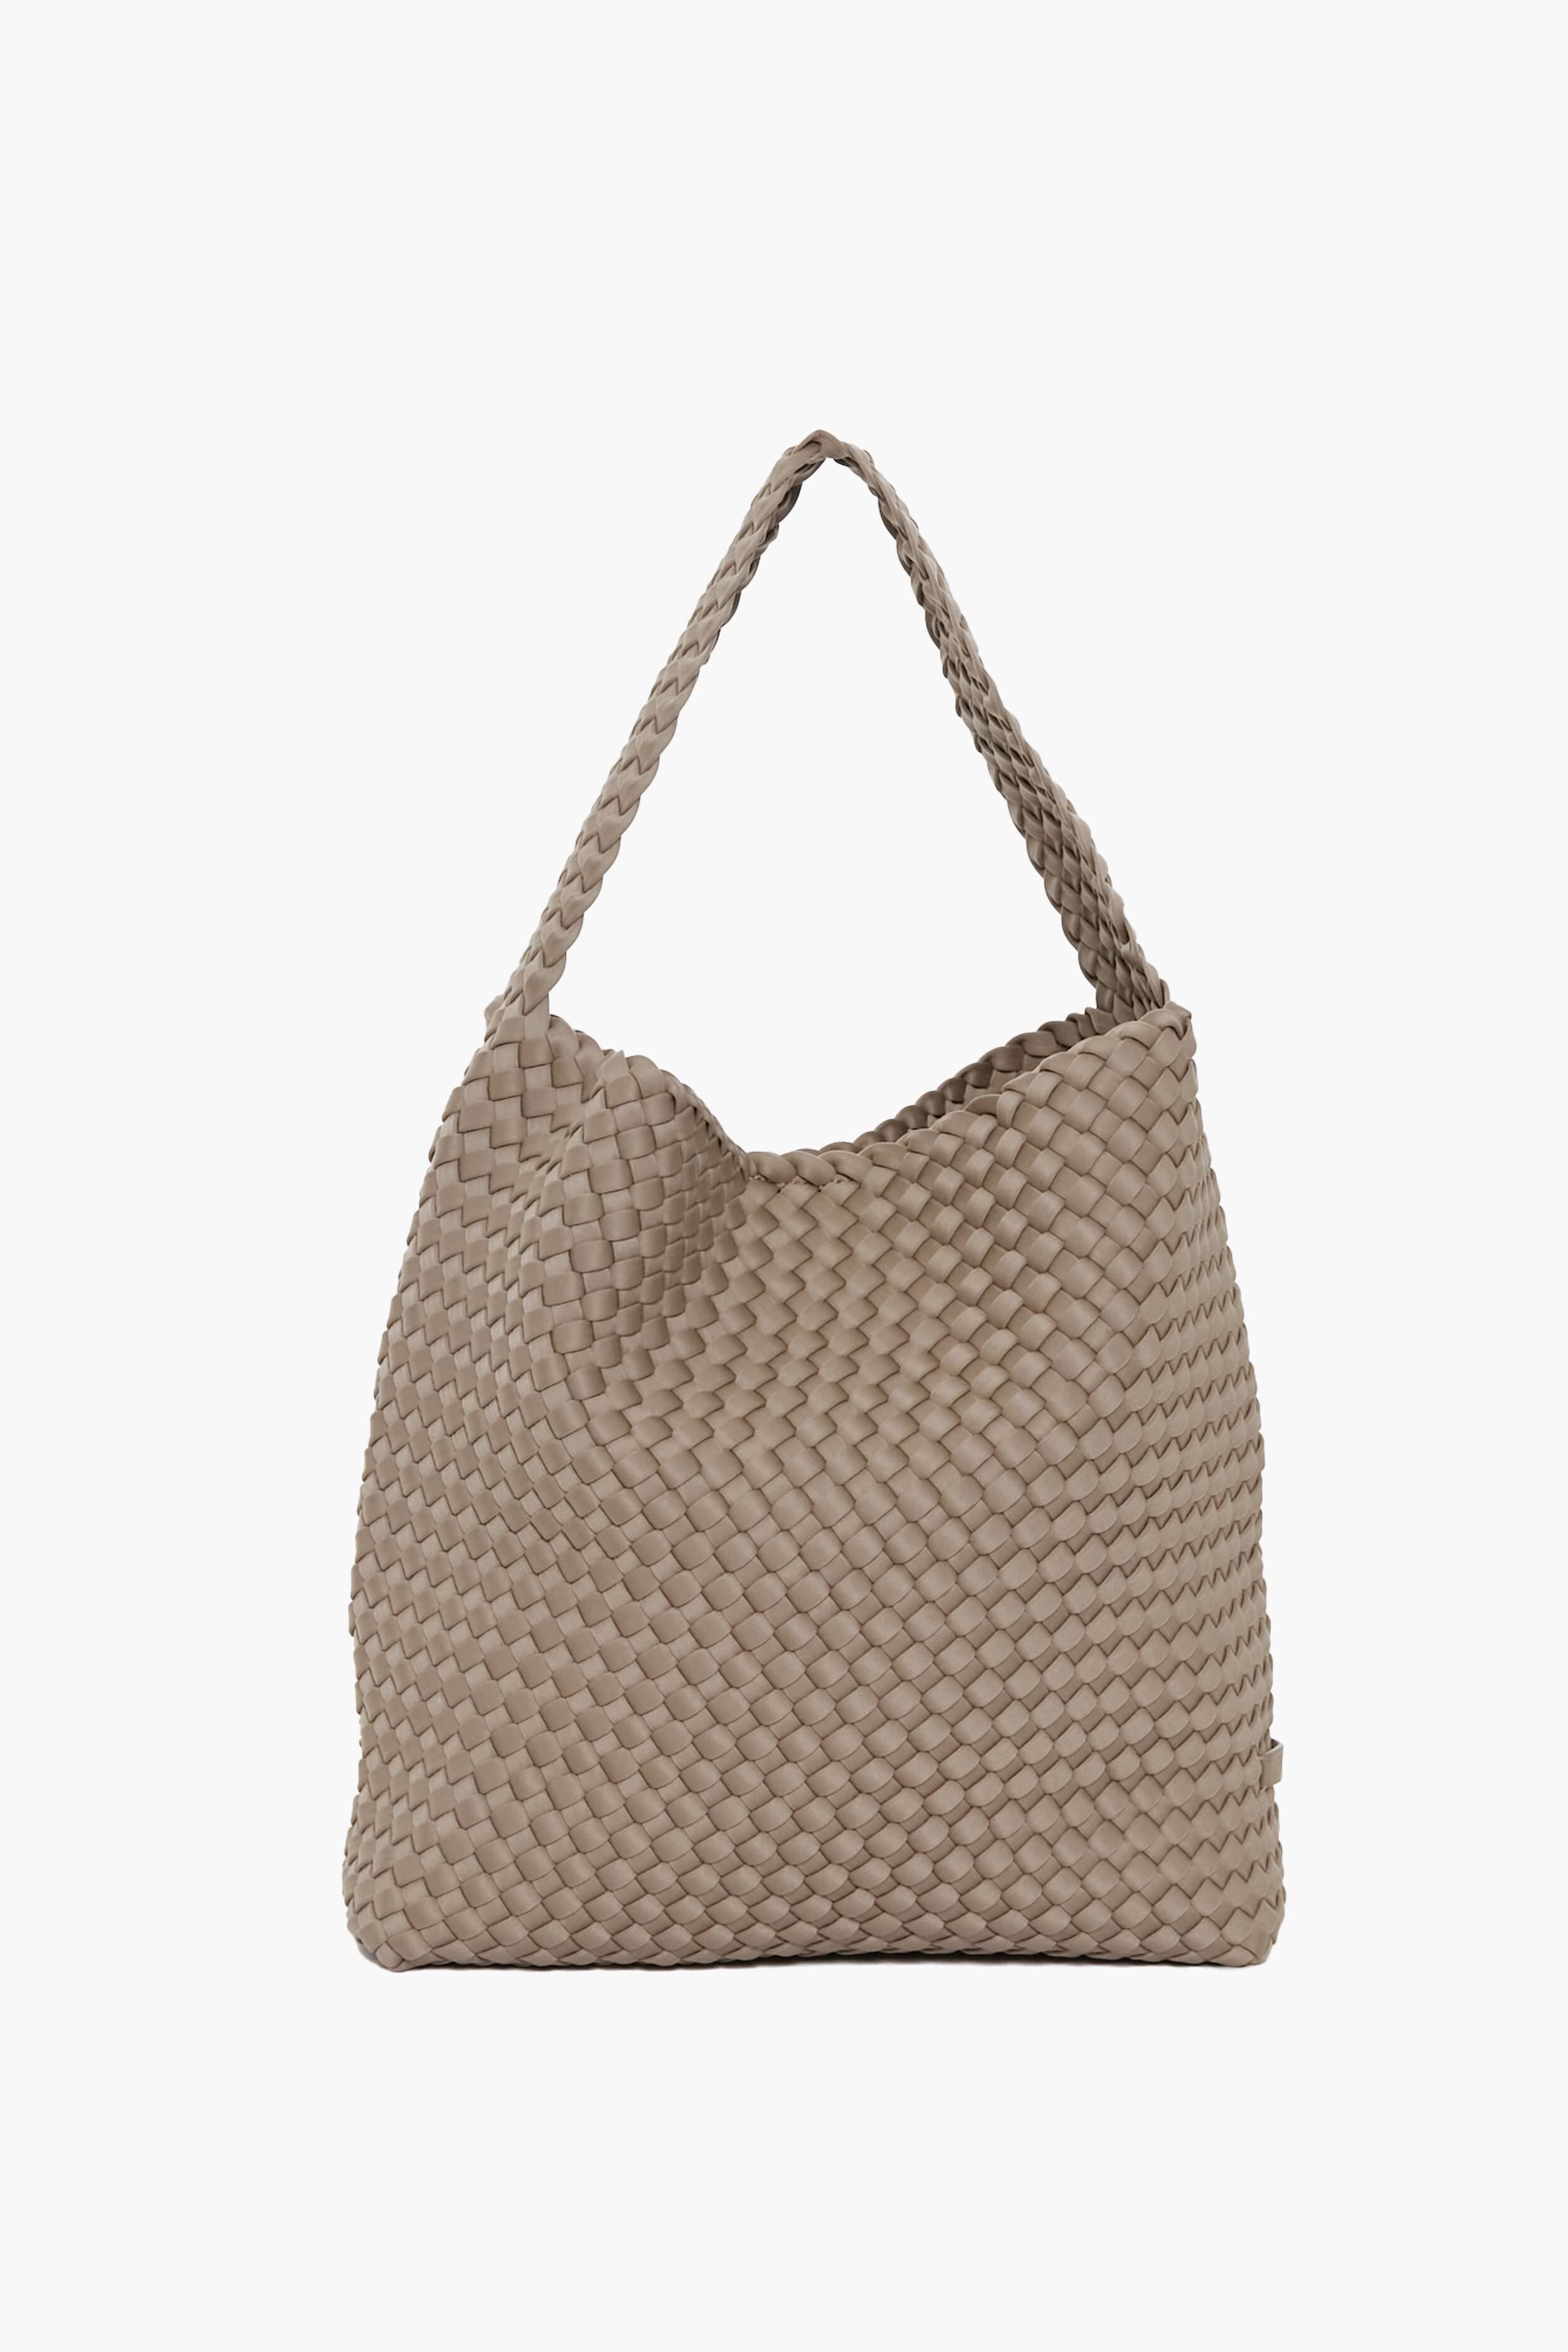 New Jim Thompson Pleated Silk Small Hobo Bag With Matching Detachable